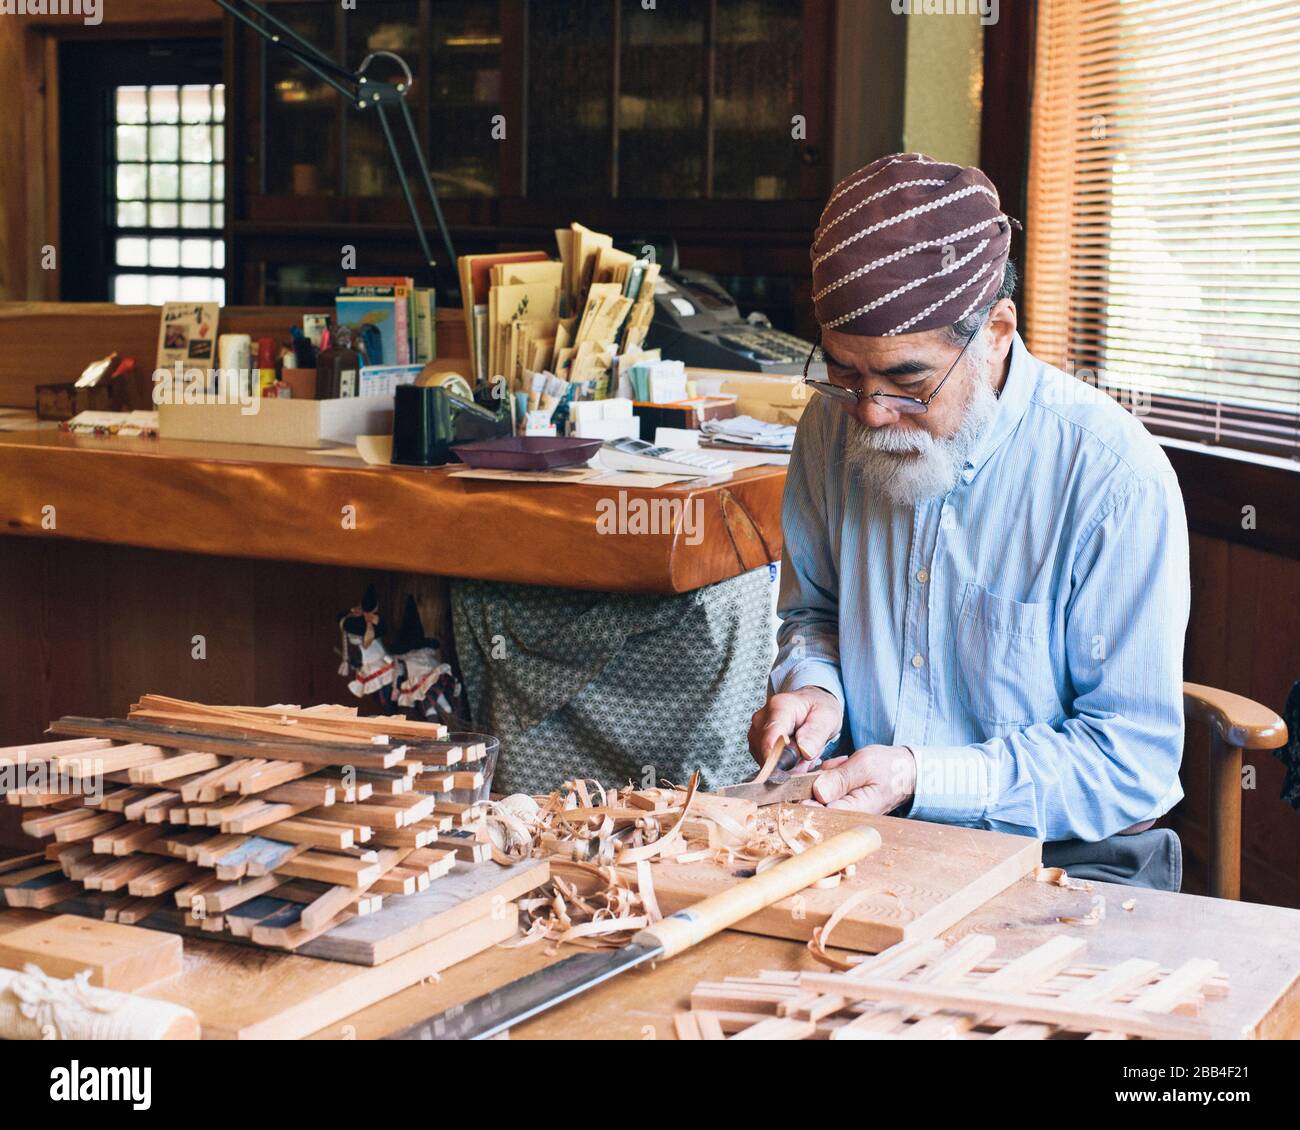 Handmade in Japan - A book about Japanese craftmanship and